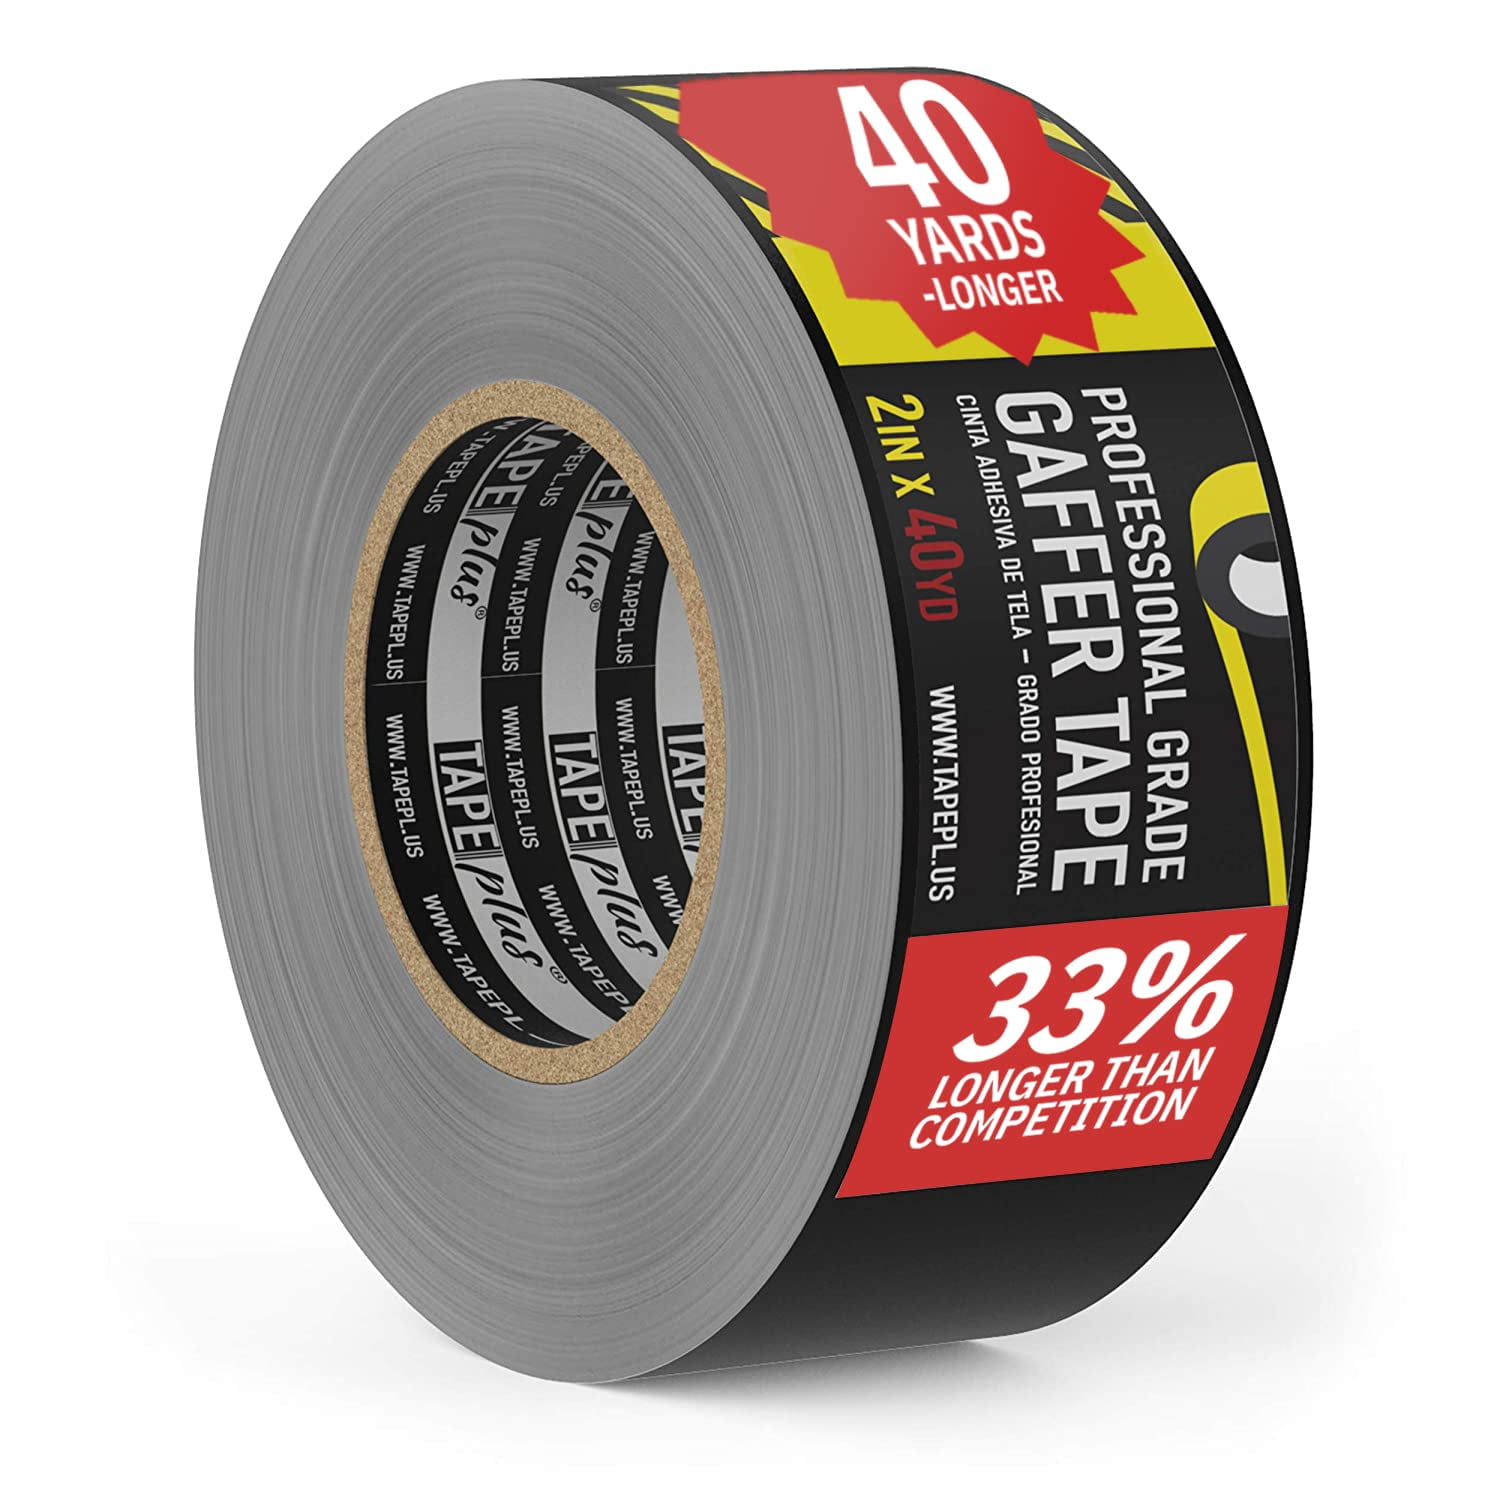 Real Professional Premium Grade Gaffer Tape by Gaffer Power Non-Reflective Better Than Duct Tape! Black- Made in The USA Multipurpose Heavy Duty Gaffers Tape 4 Inch X 30 Yards 